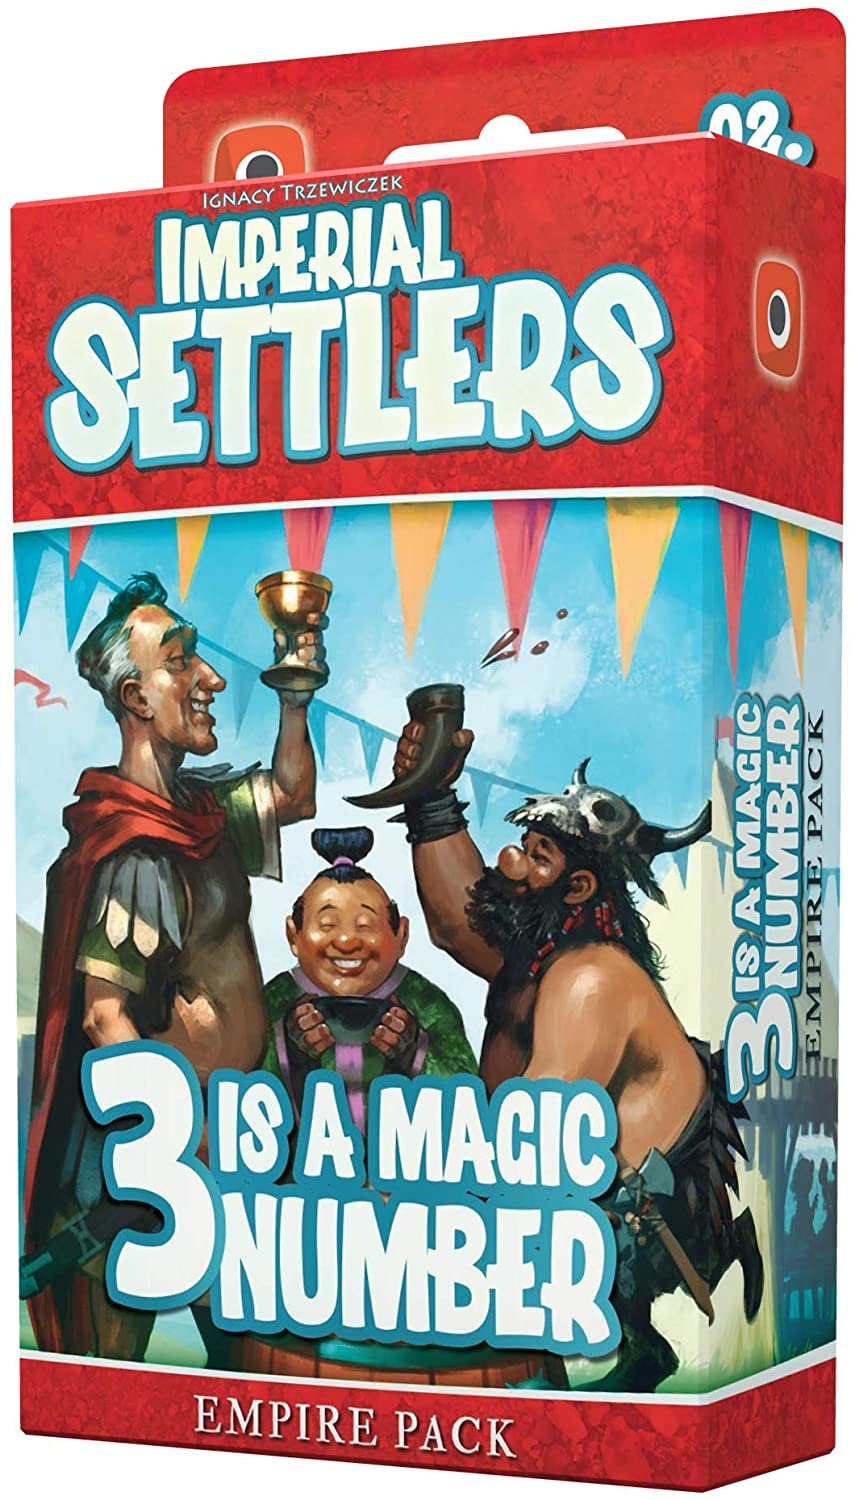 IMPERIAL SETTLERS 3 IS A MAGIC NUMBER